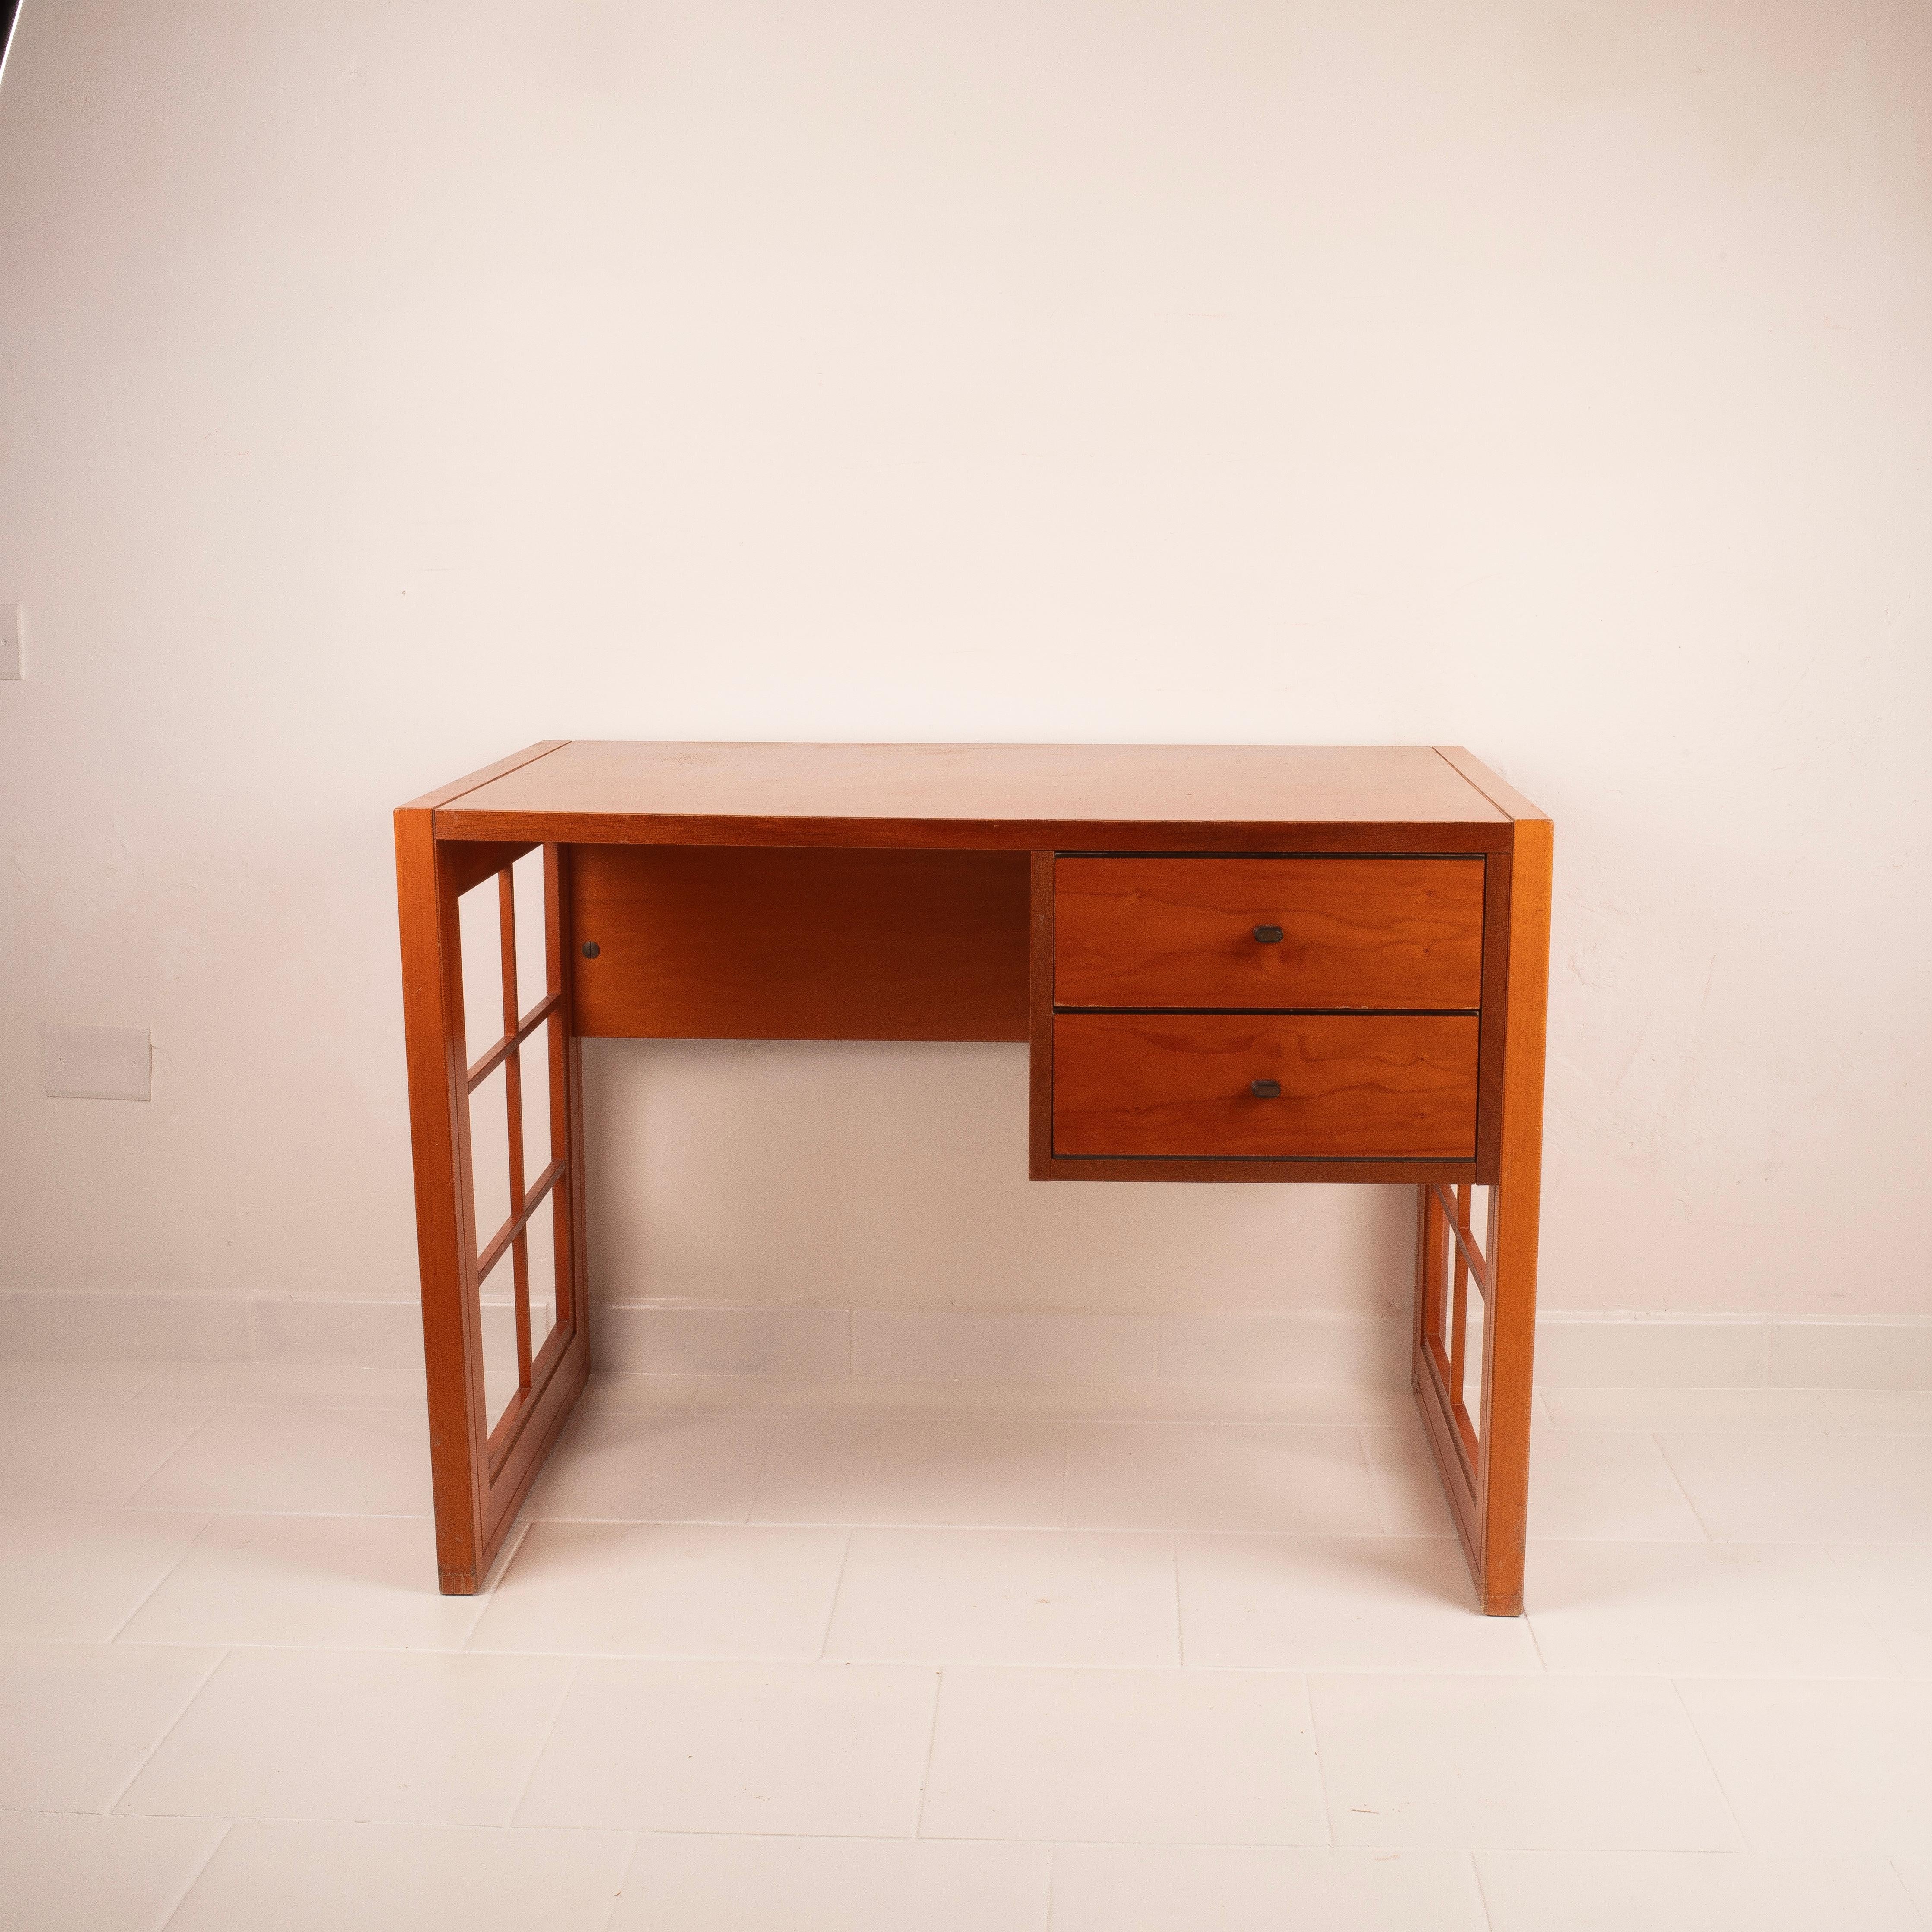 Stunning solid cherry wood desk with rosewood inlays, an authentic design gem produced by Linea Mobili company and part of the prestigious 